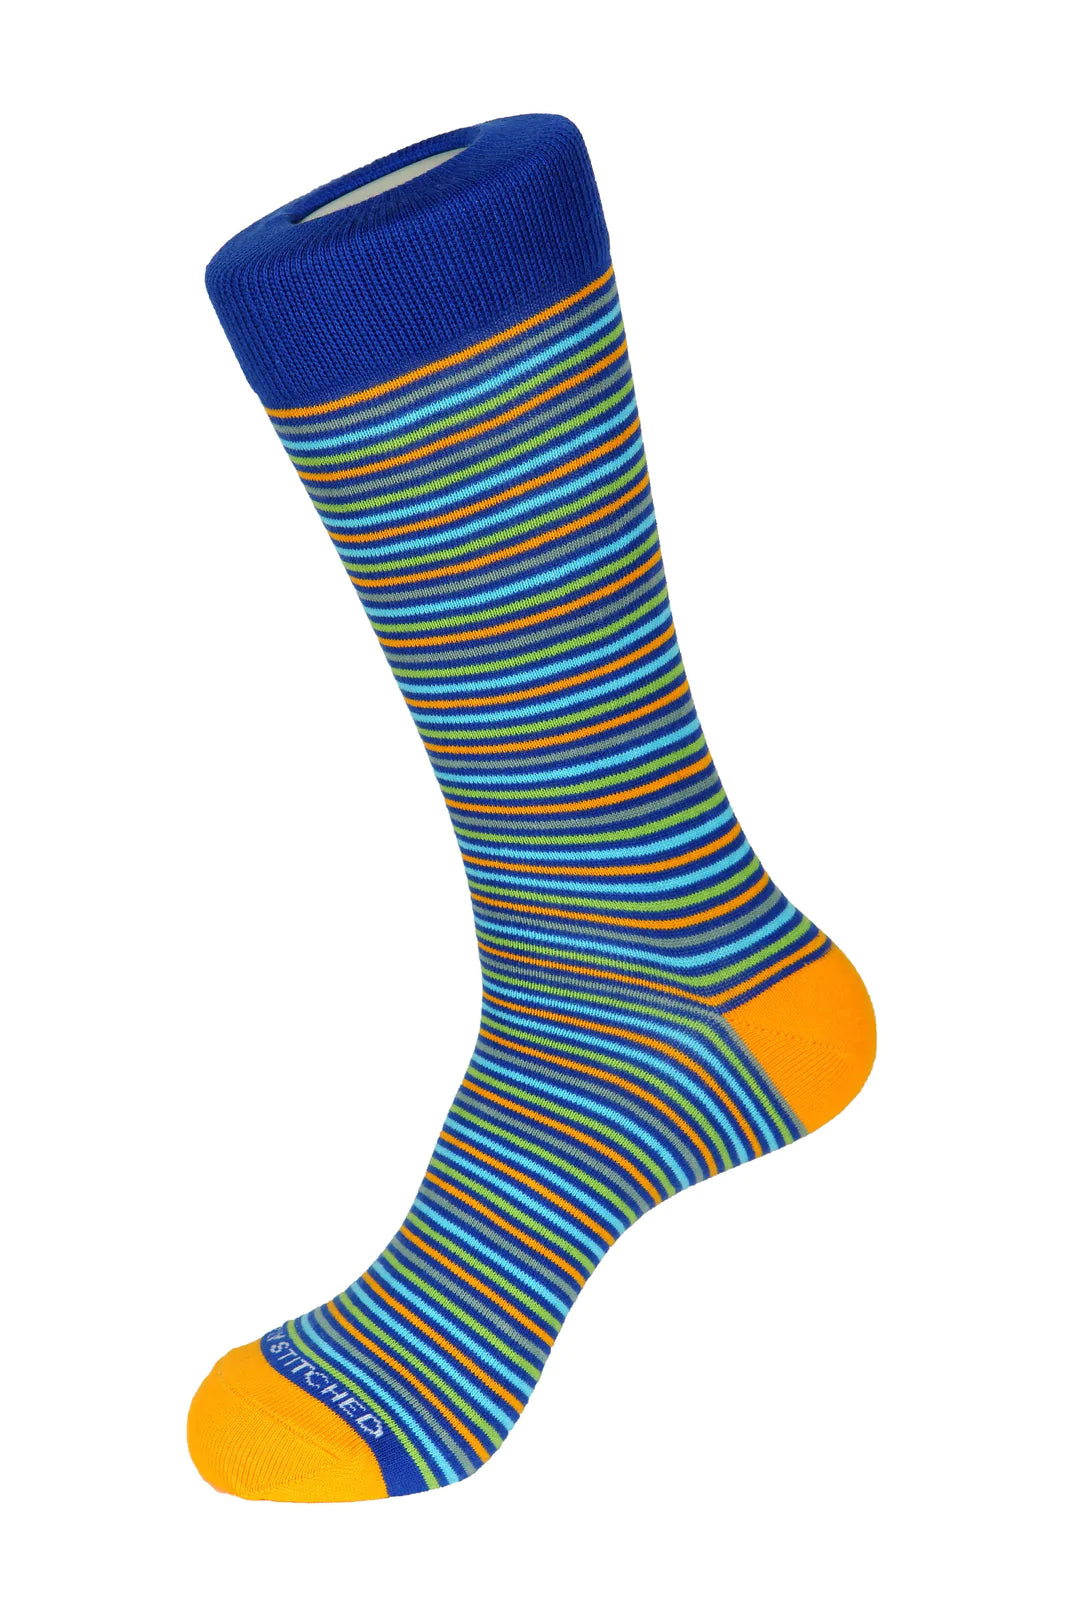 Unsimply Stitched socks with blue, orange, and green stripes, making it a great pairing with DFR89 blue denim jeans and a fun Sugar sport shirt.